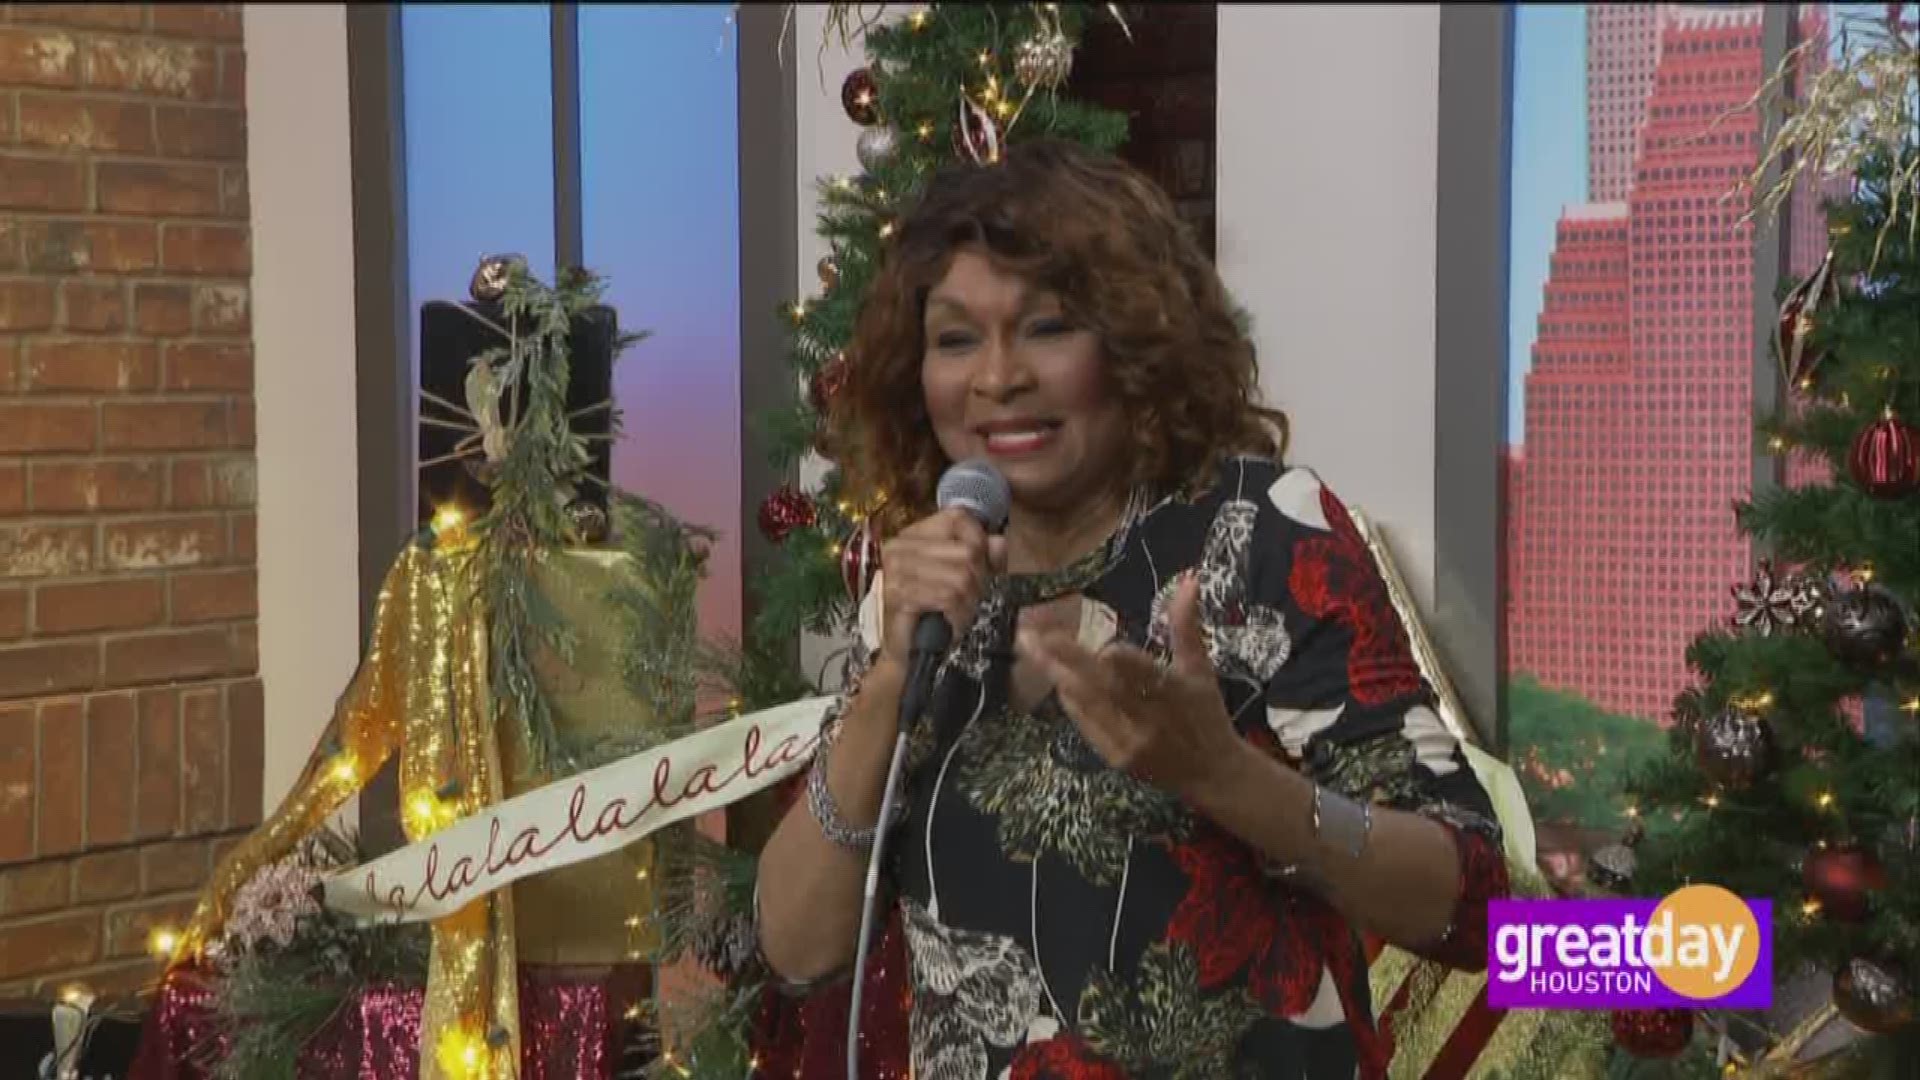 Broadway star Vivian talks about the Ensemble Theatre's upcoming holiday musical, "More Than Christmas."